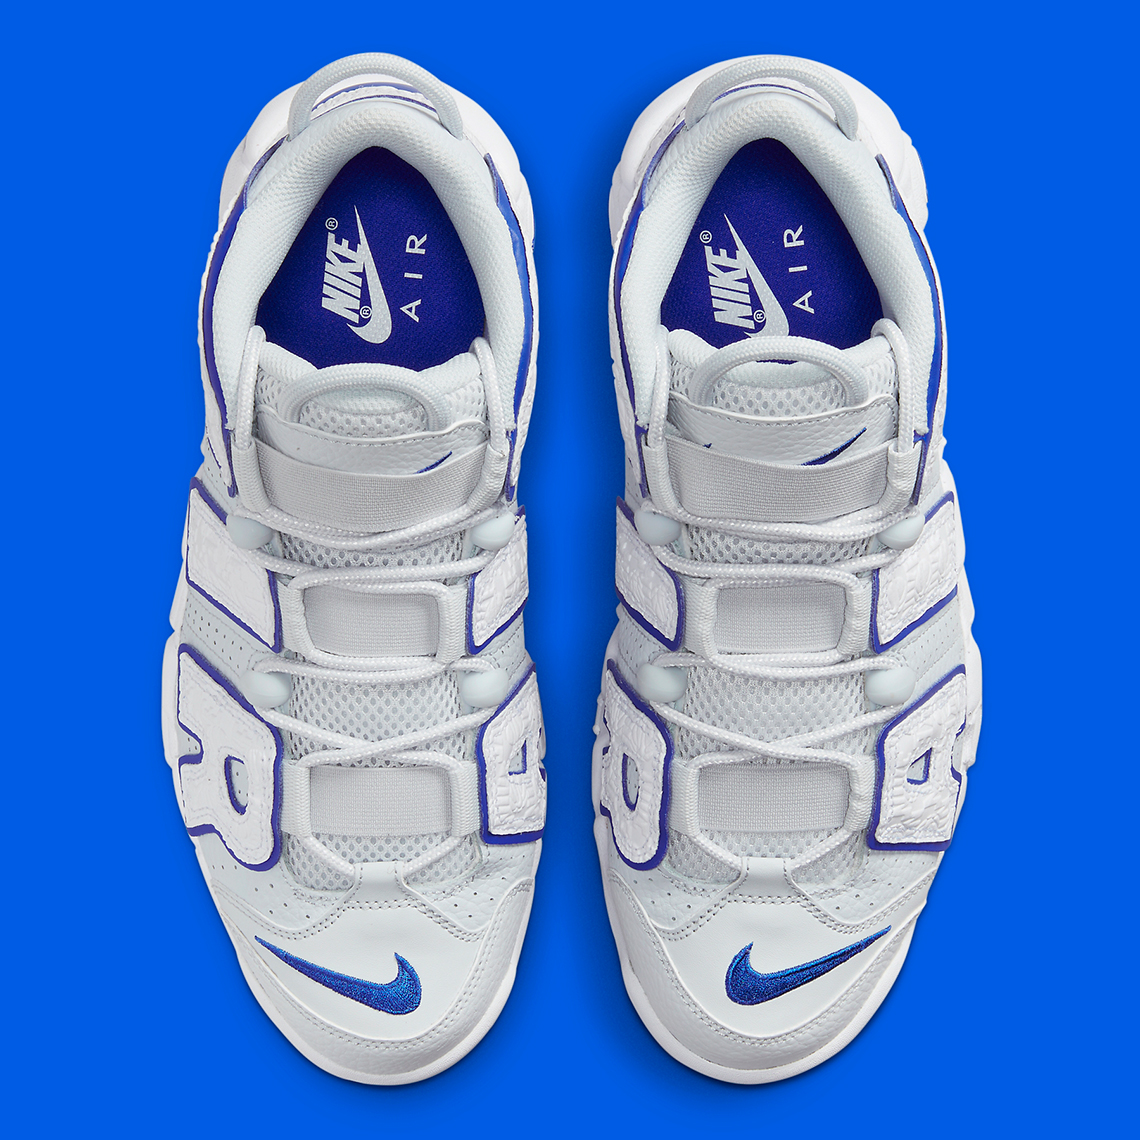 Nike Air More Uptempo Embossed White Royal Fd0669 100 1